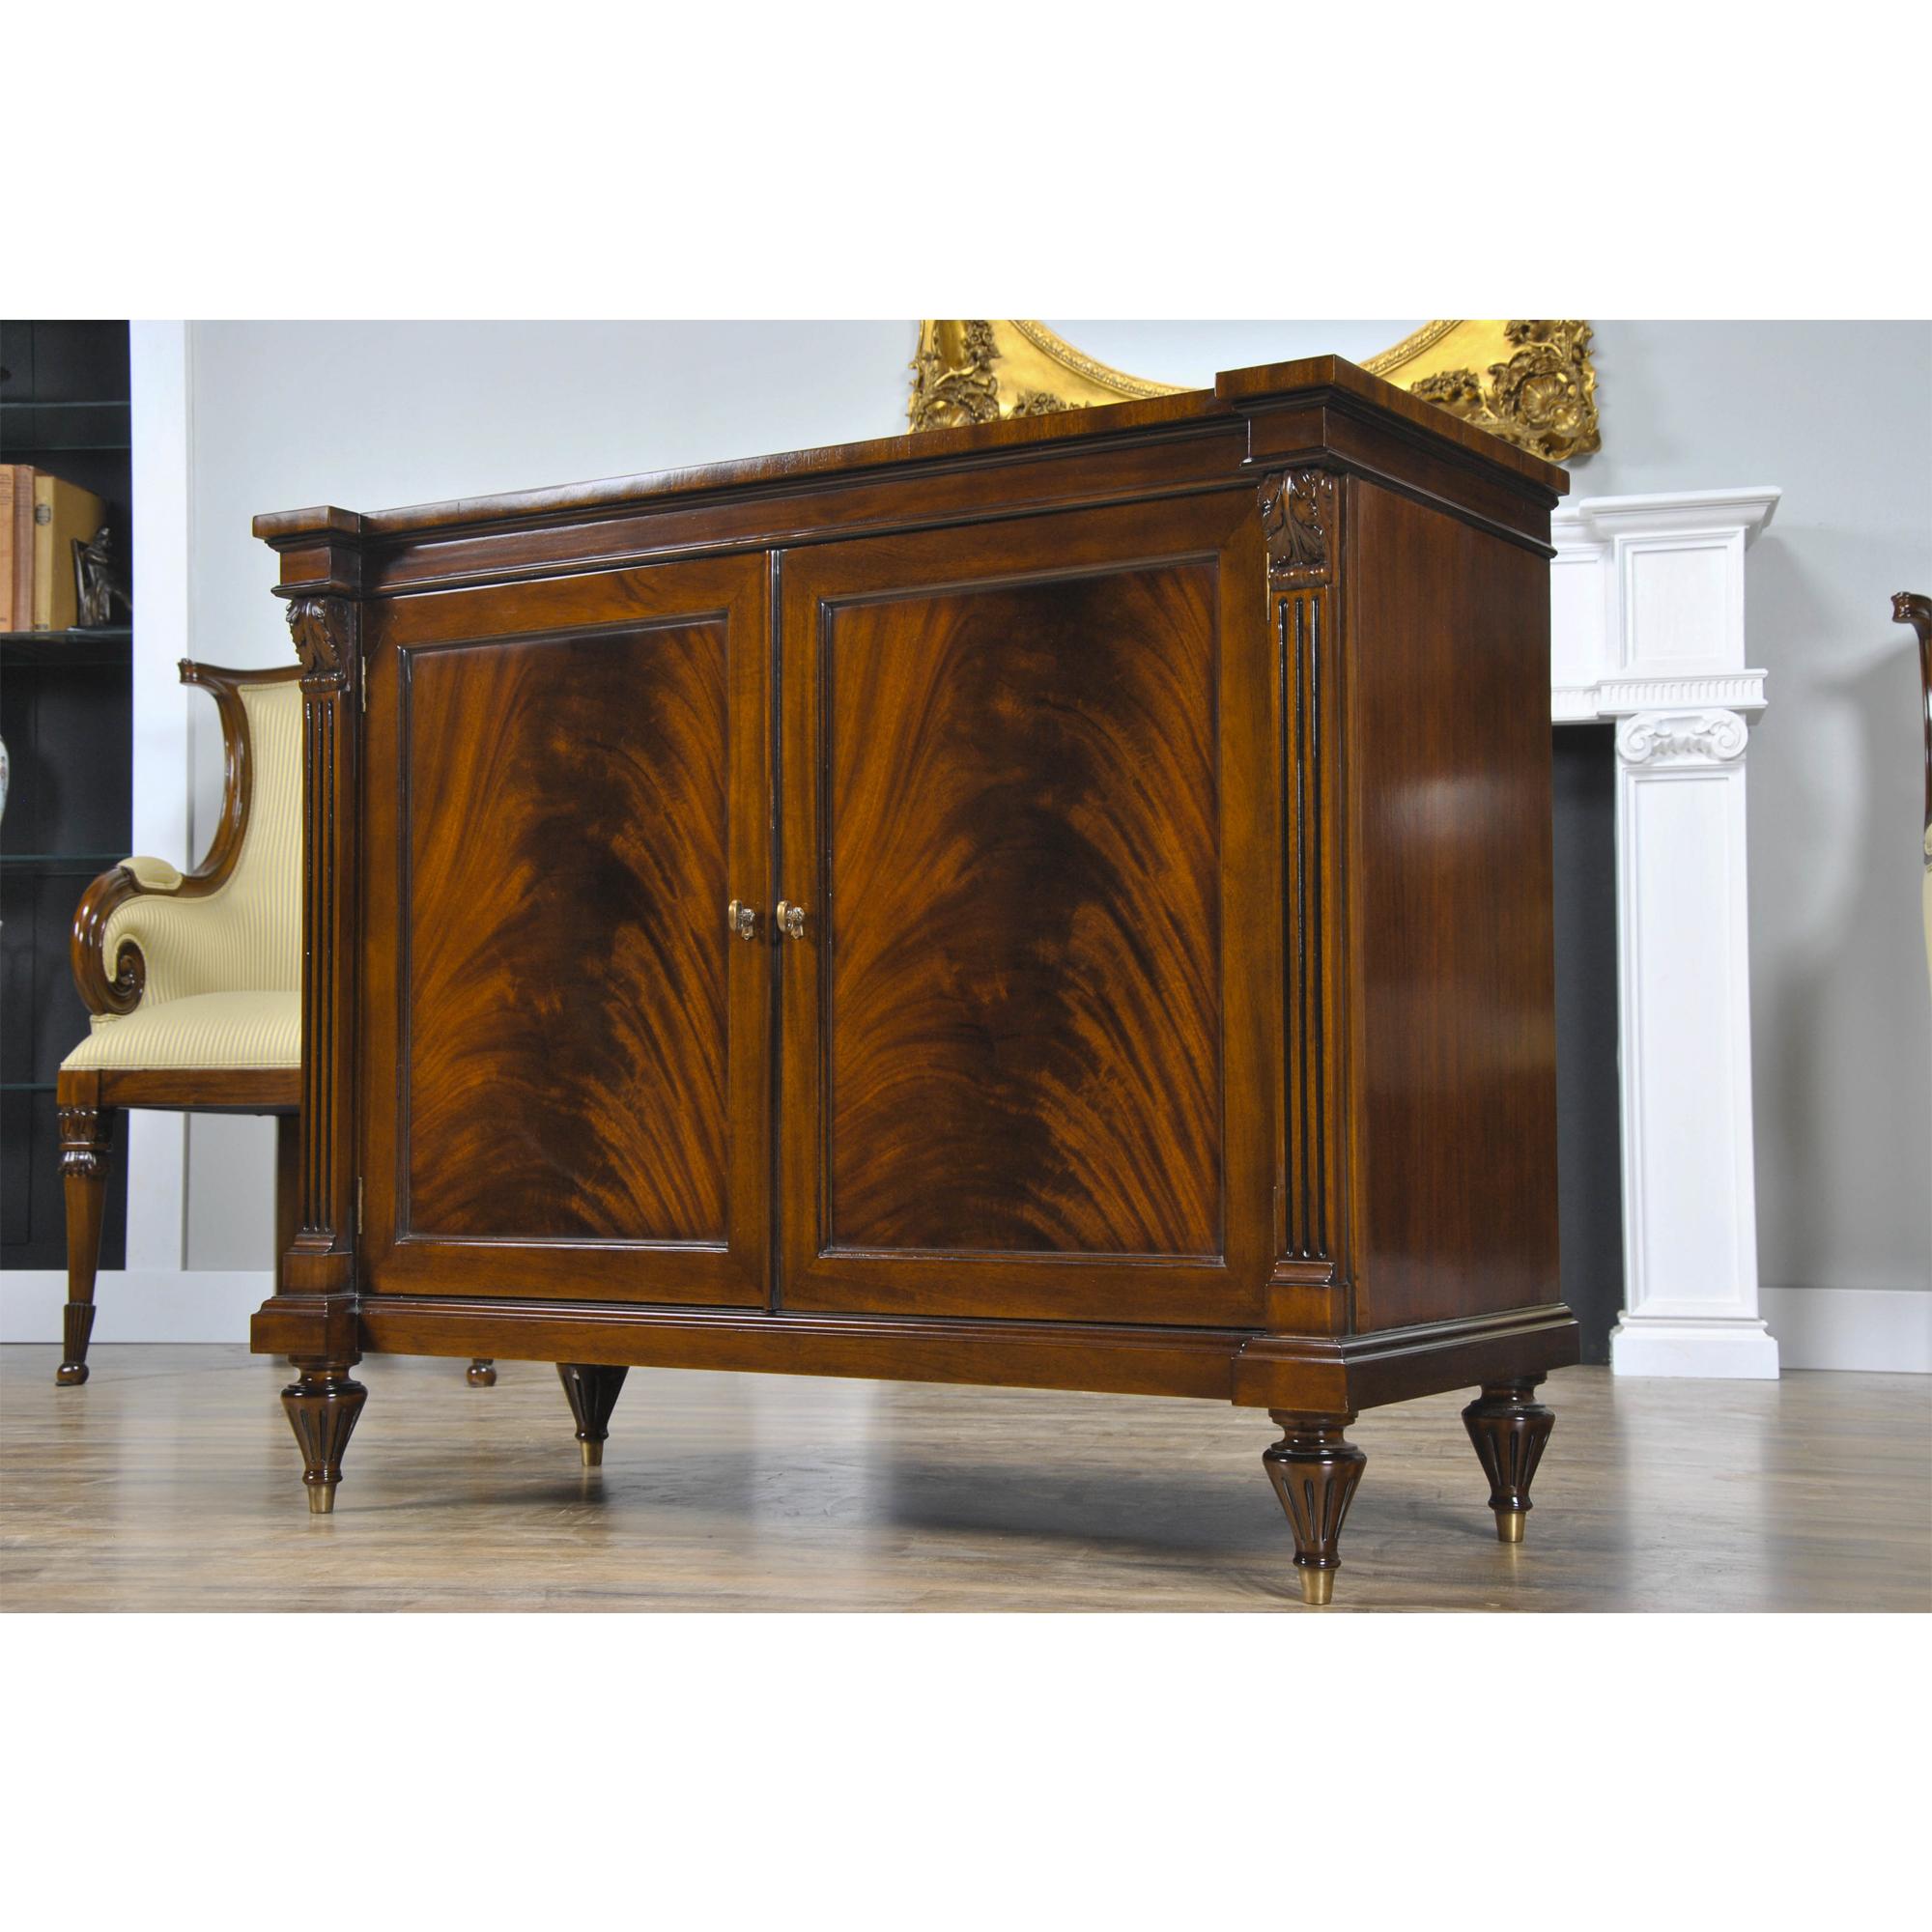 A fine quality Mahogany Penhurst Server Cabinet with two large figural paneled doors opening to reveal a single wooden shelf. Block front reeded columns surround the doors and feature hand carved solid mahogany decorations on top. The entire